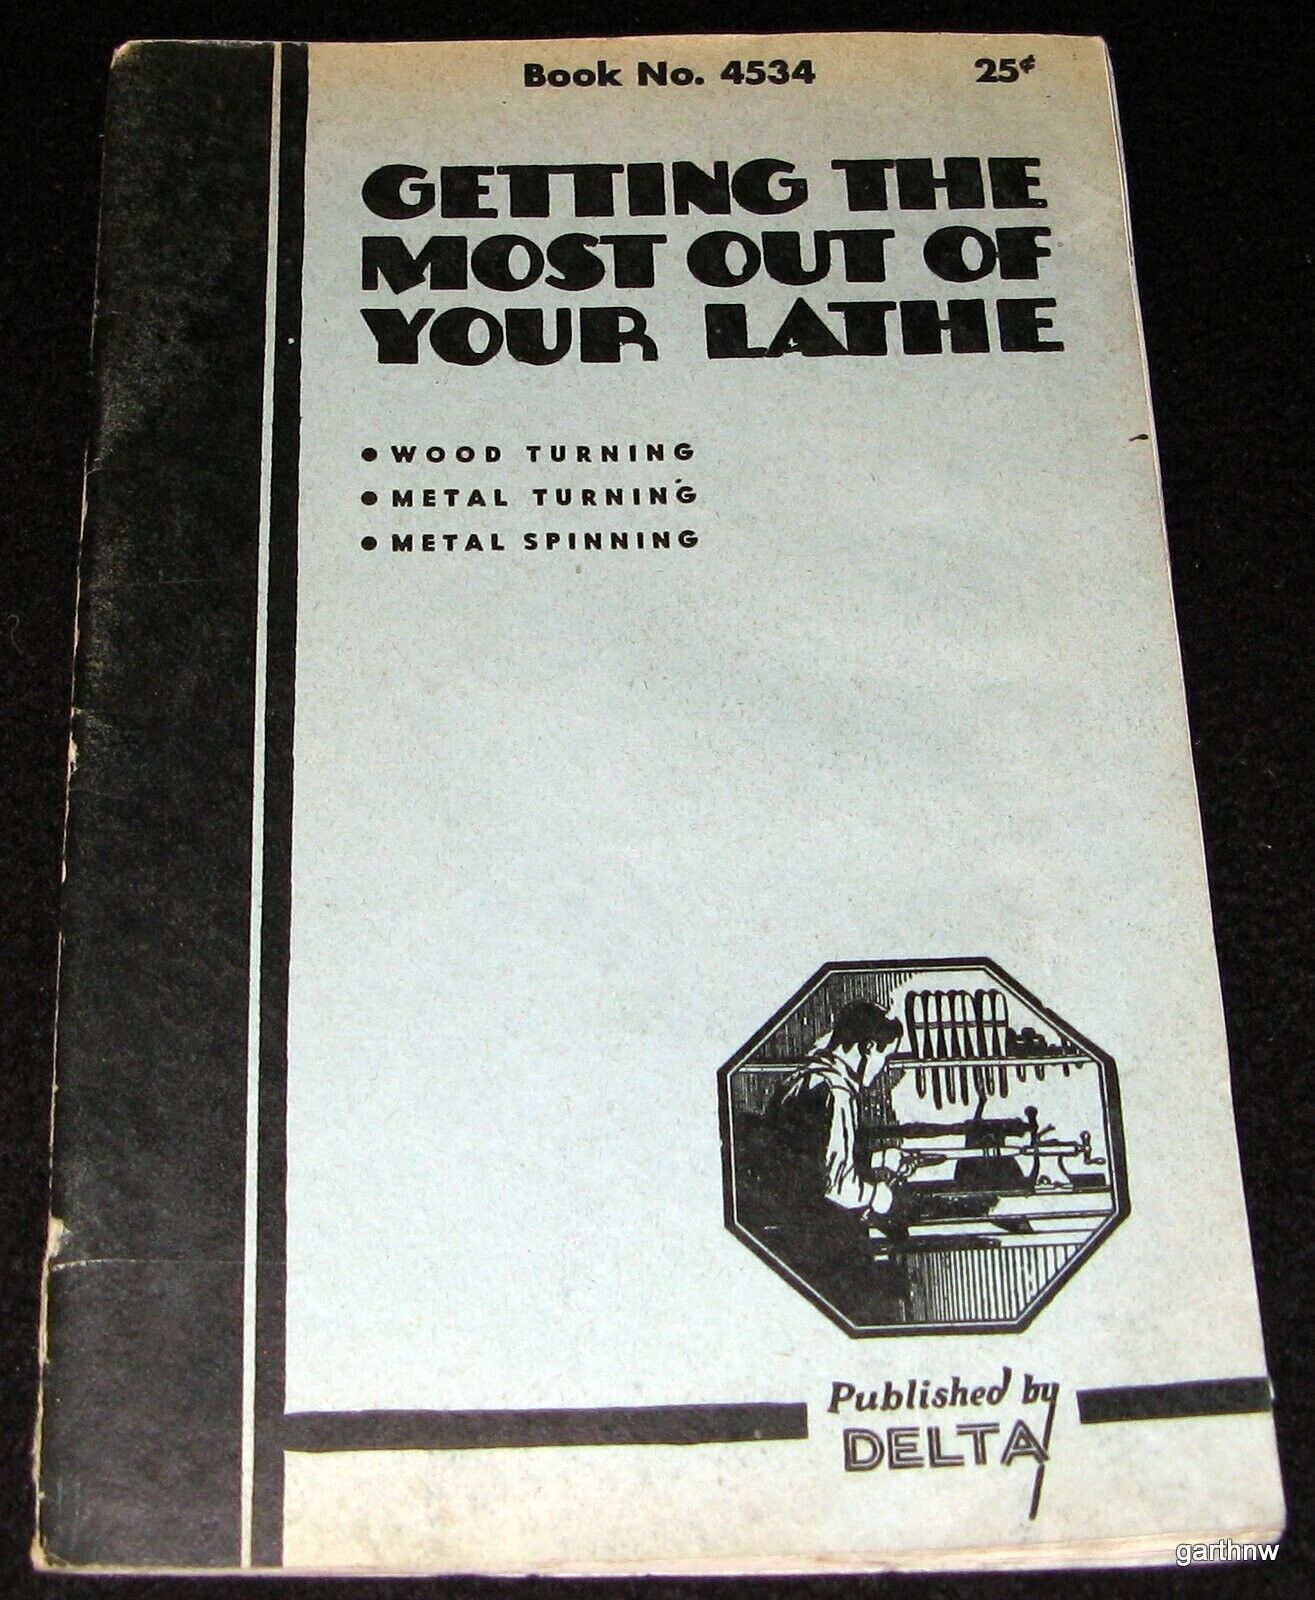 LATHES WORKBOOK 1947 GETTING THE MOST OUT OF YOUR LATHE PICTORIAL GUIDE * DELTA